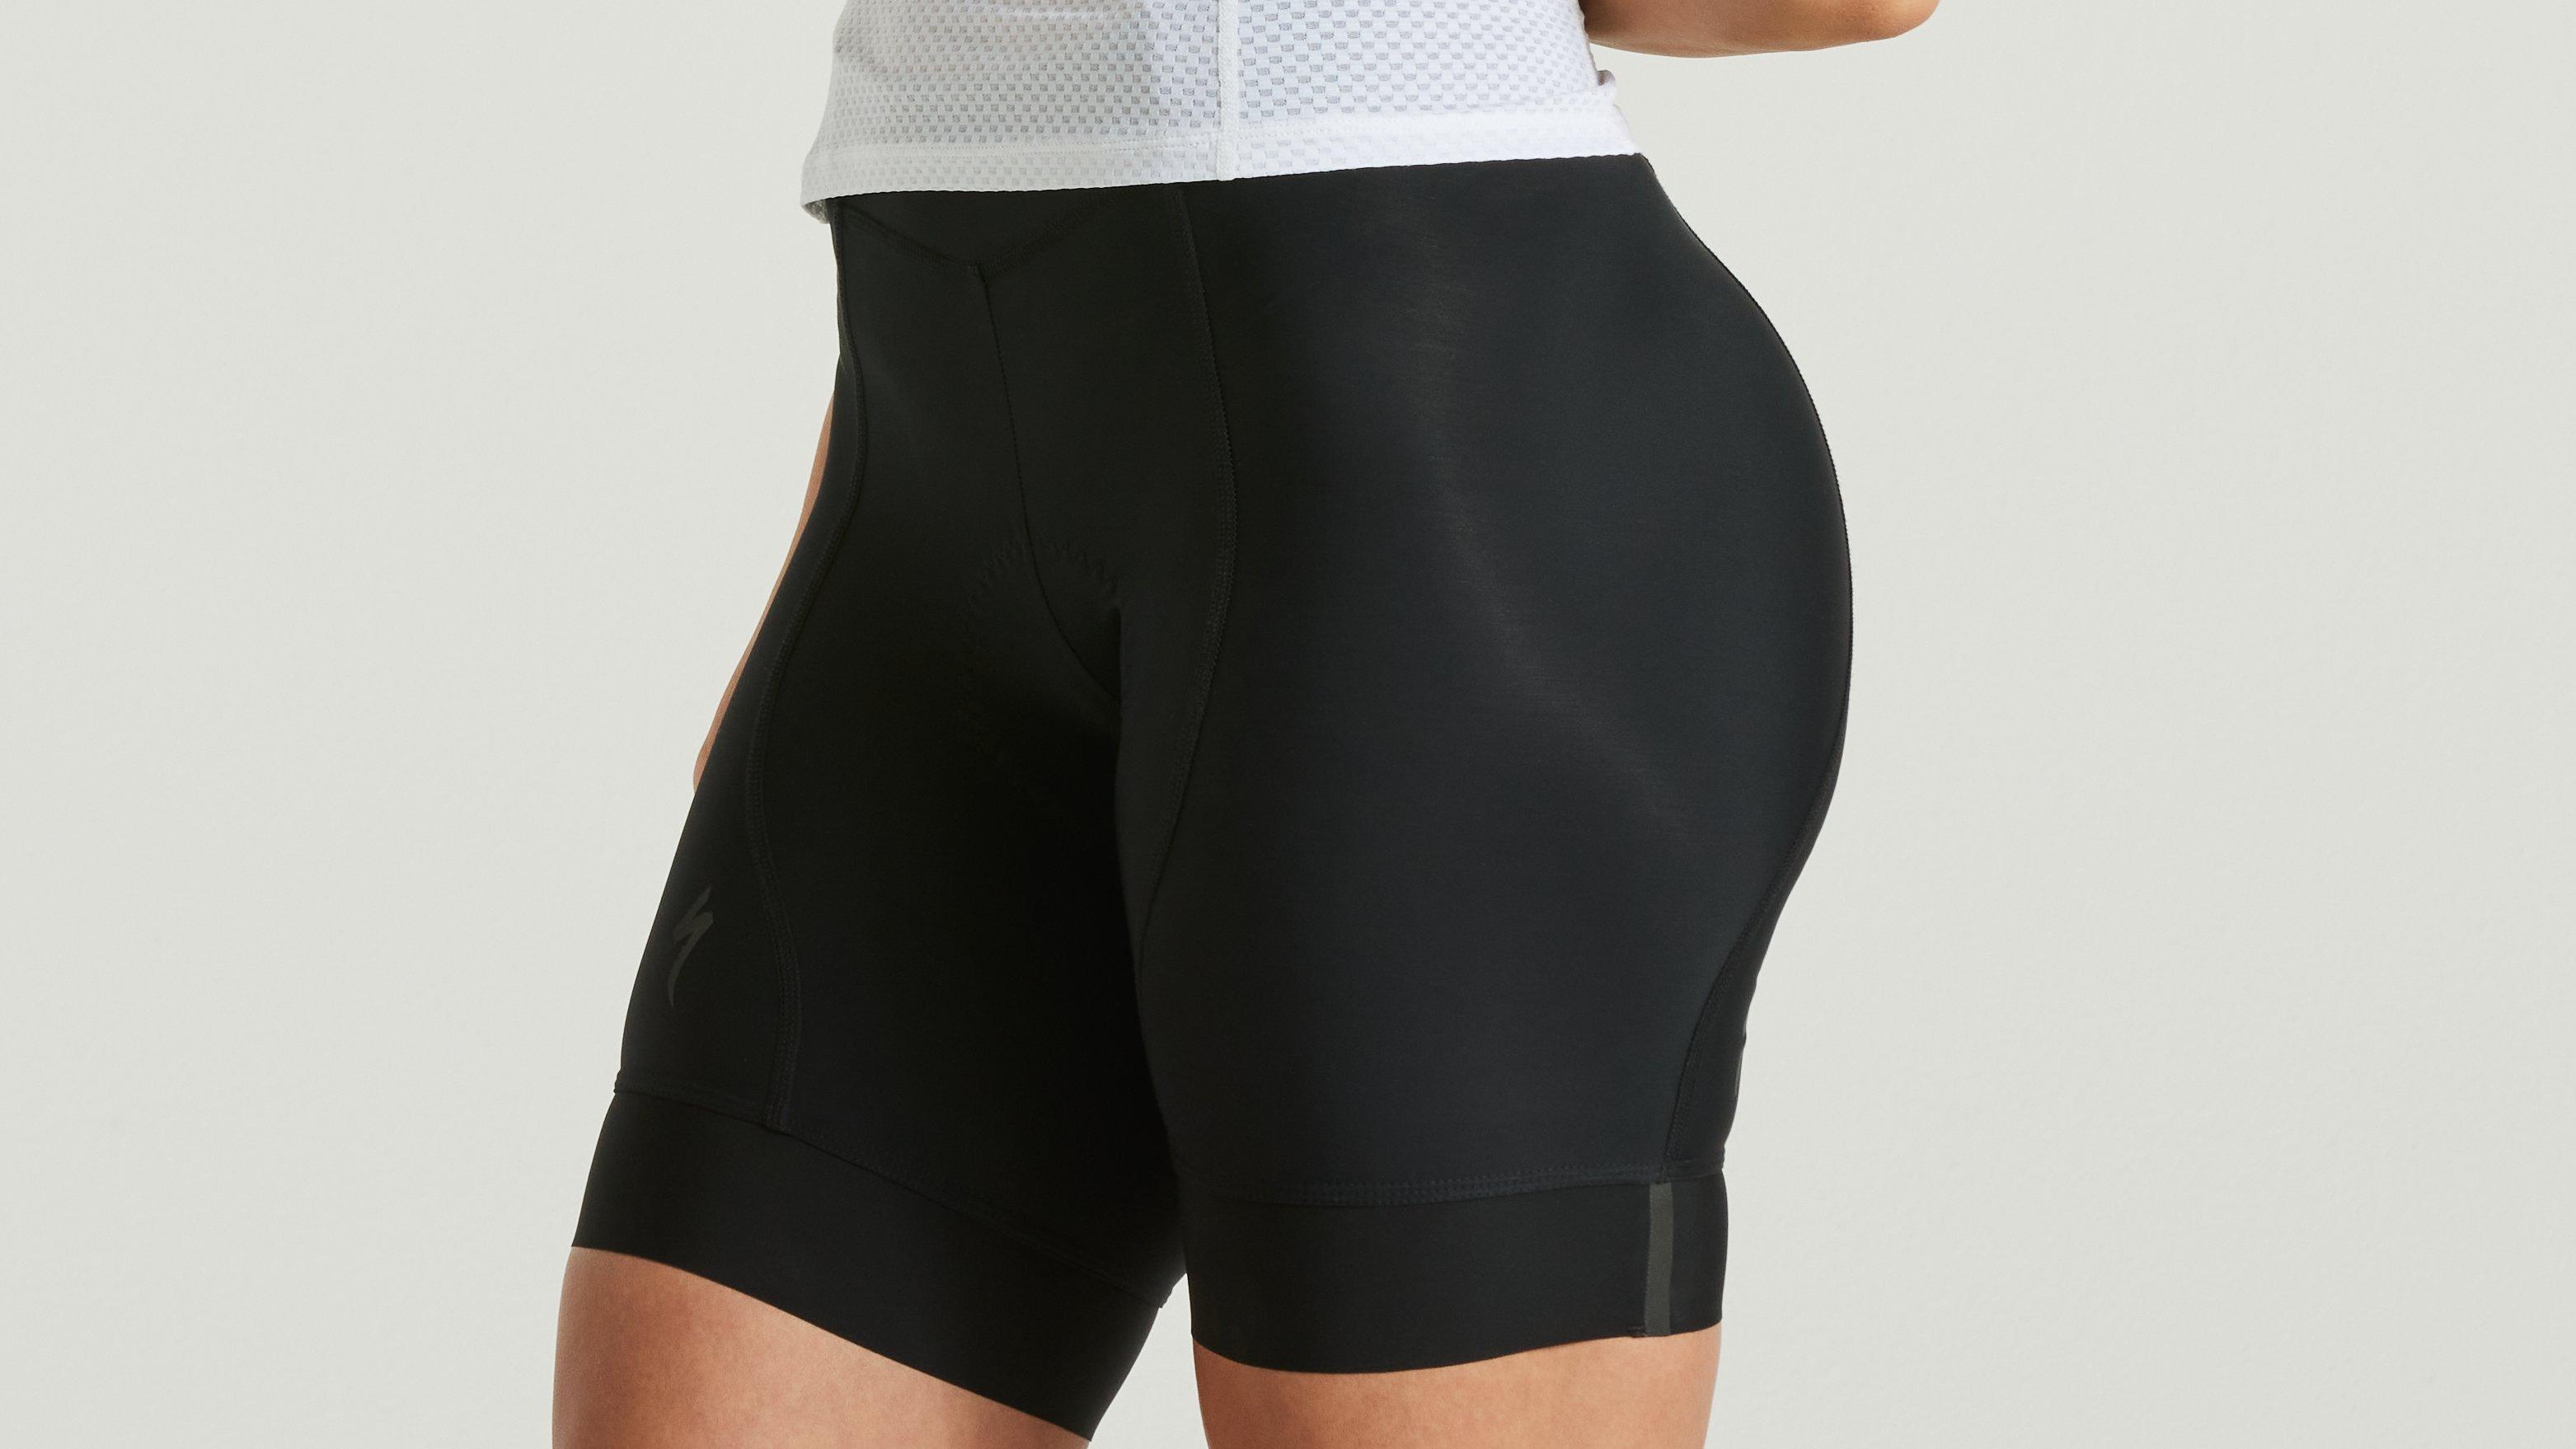 Specialized Women's RBX Sport Shorts - The Bicycle Chain